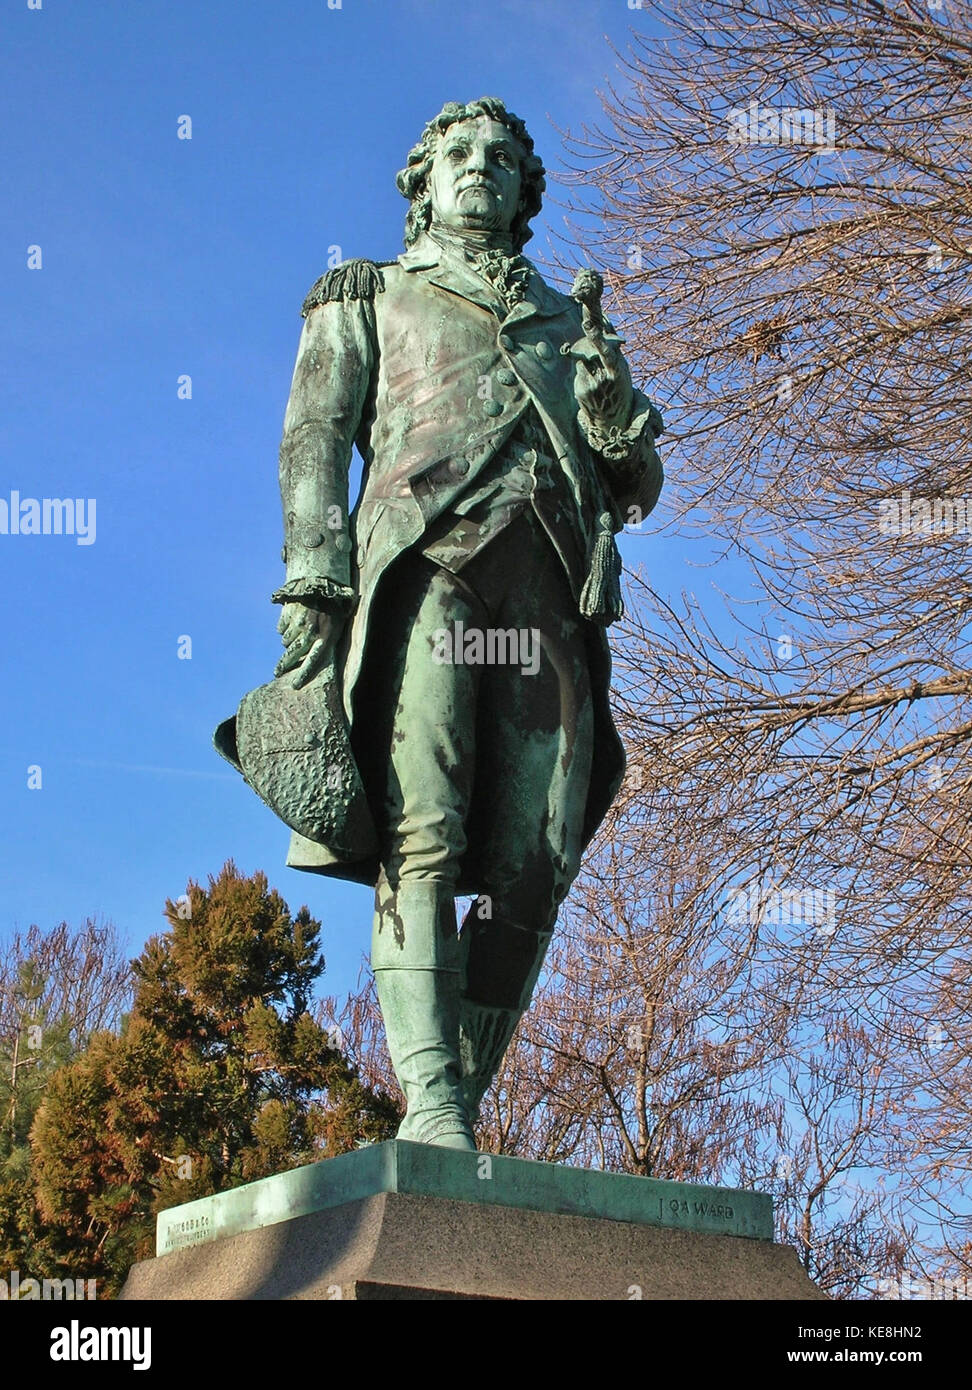 Statue of Israel Putnam by John Quincy Adams Ward in Bushnell Park, Hartford, CT   January 2016 Stock Photo